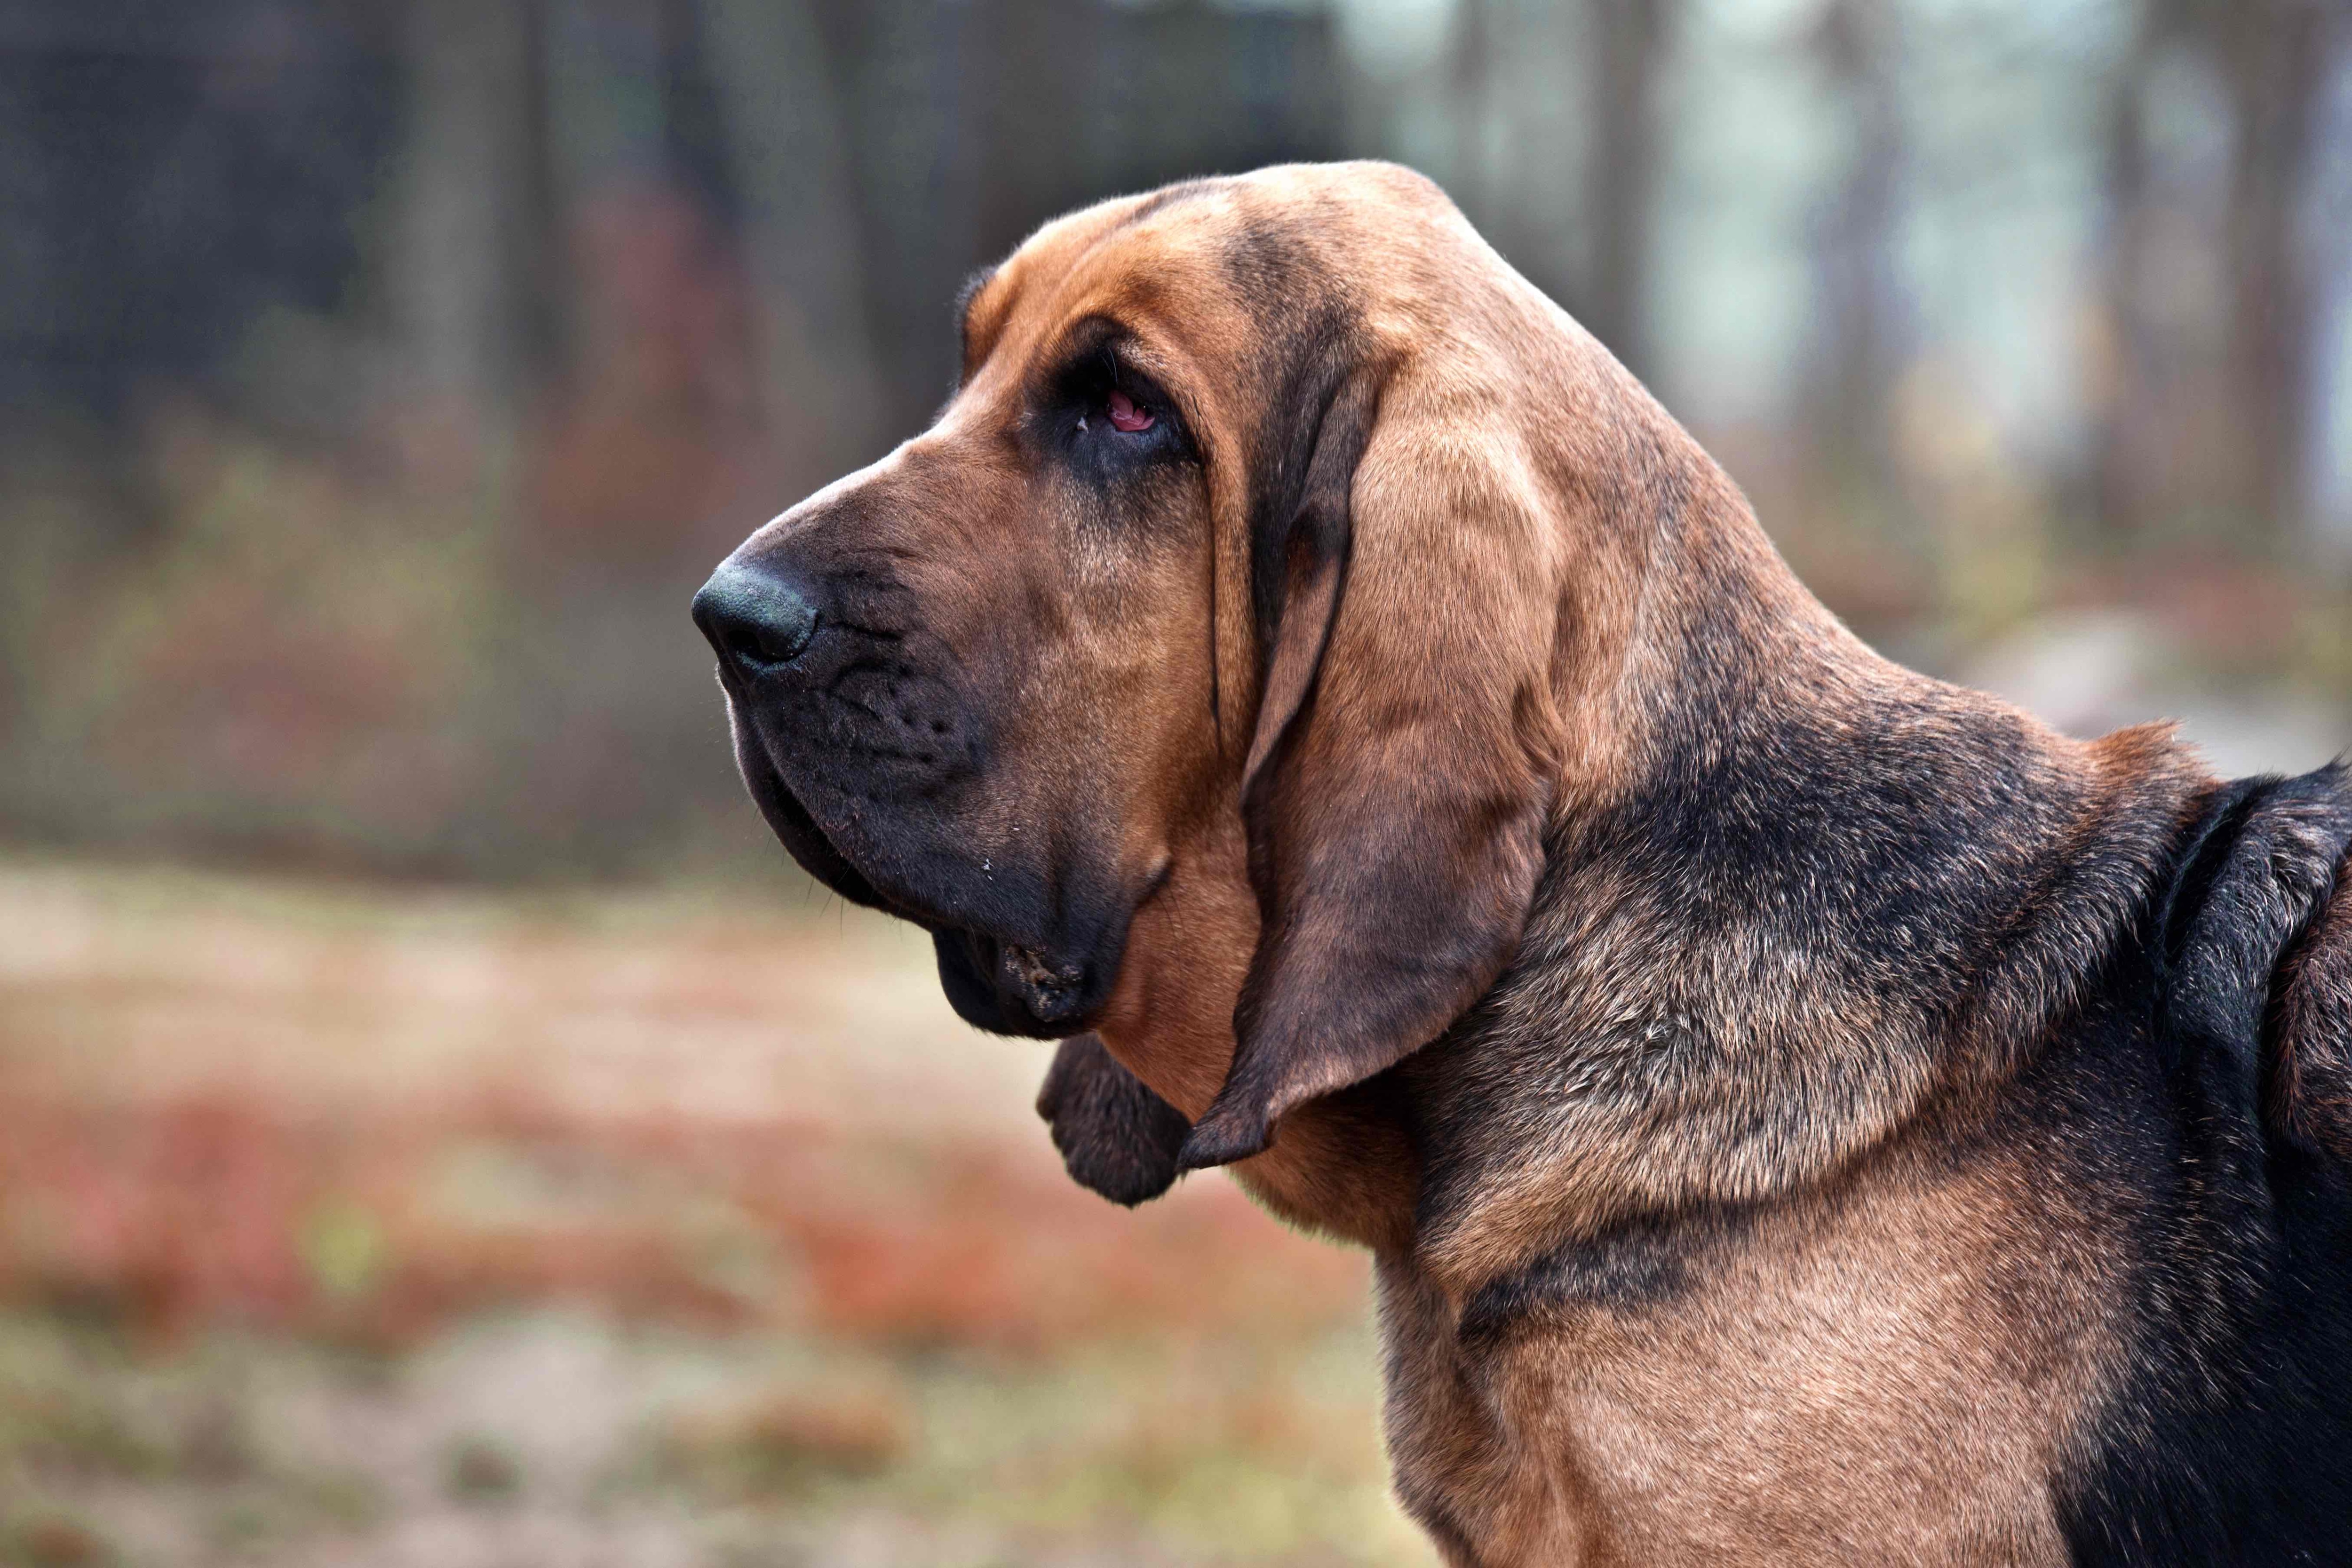 close-up of a bloodhound dog's head